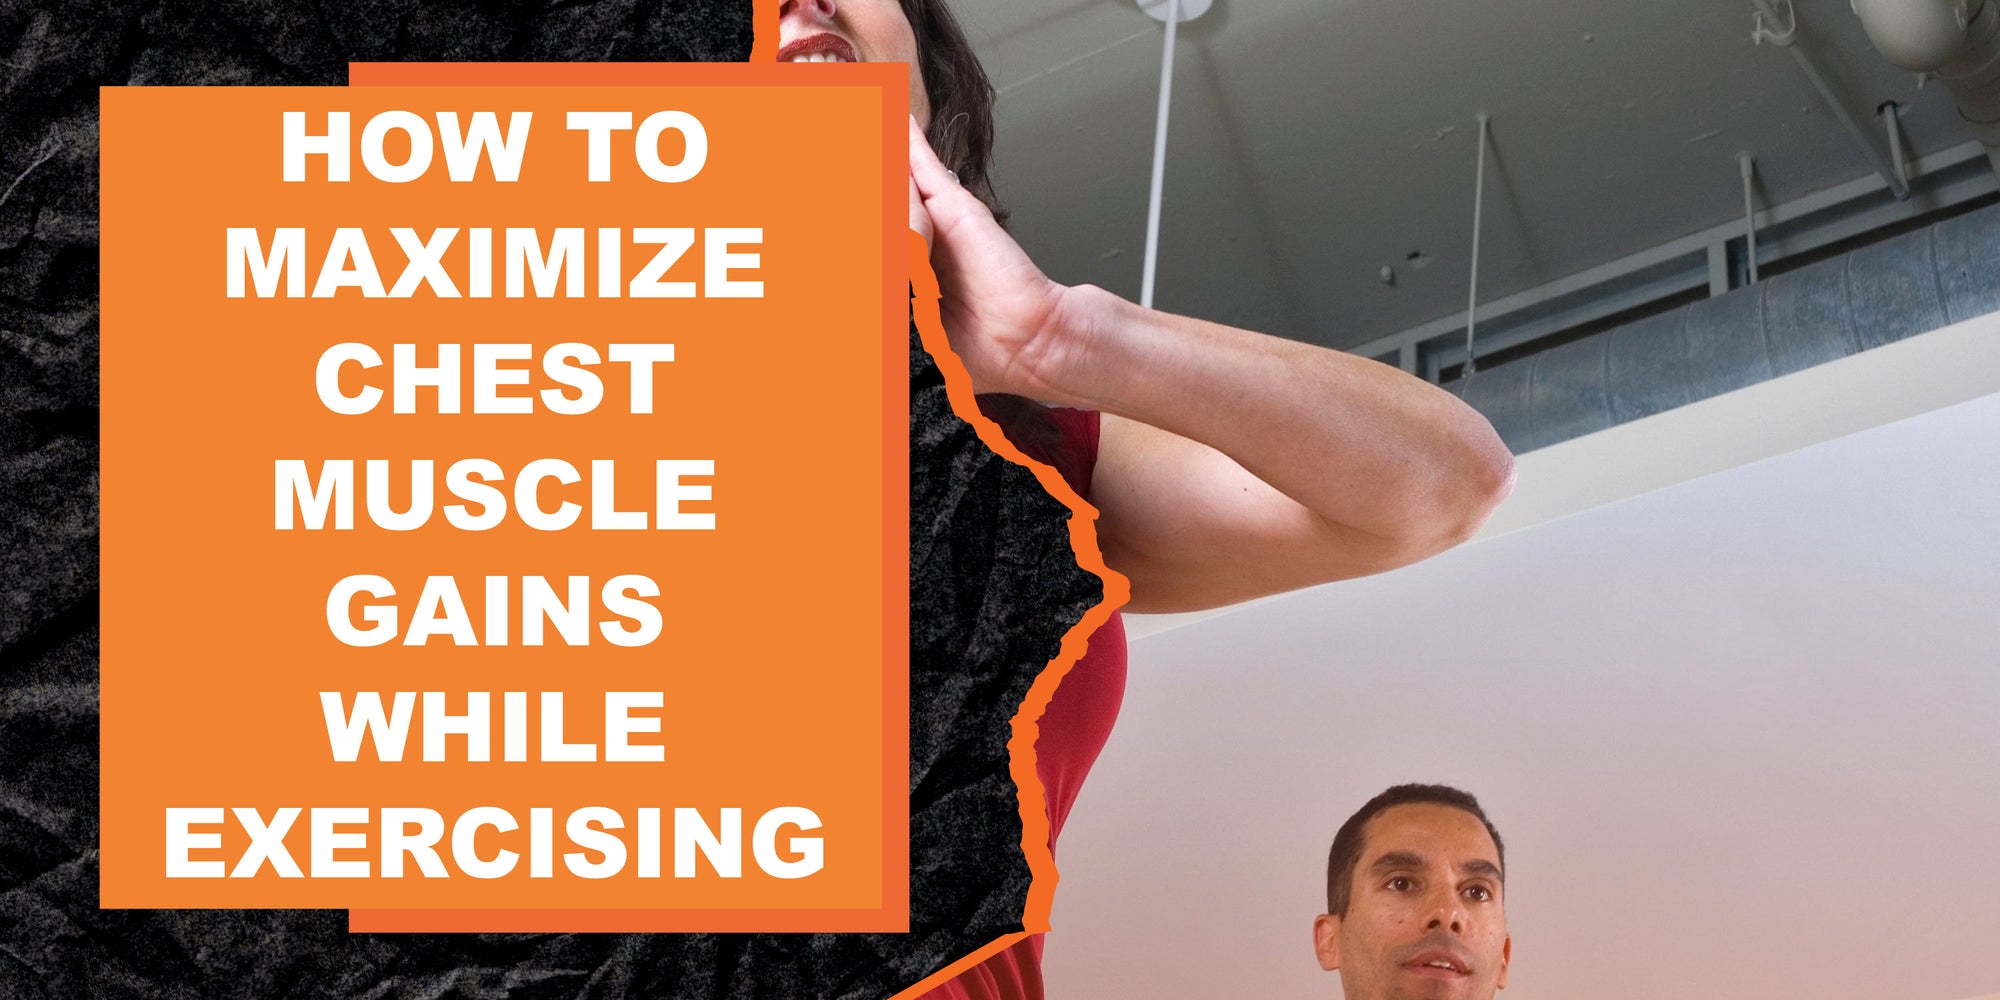 How to Maximize Chest Muscle Gains While Exercising